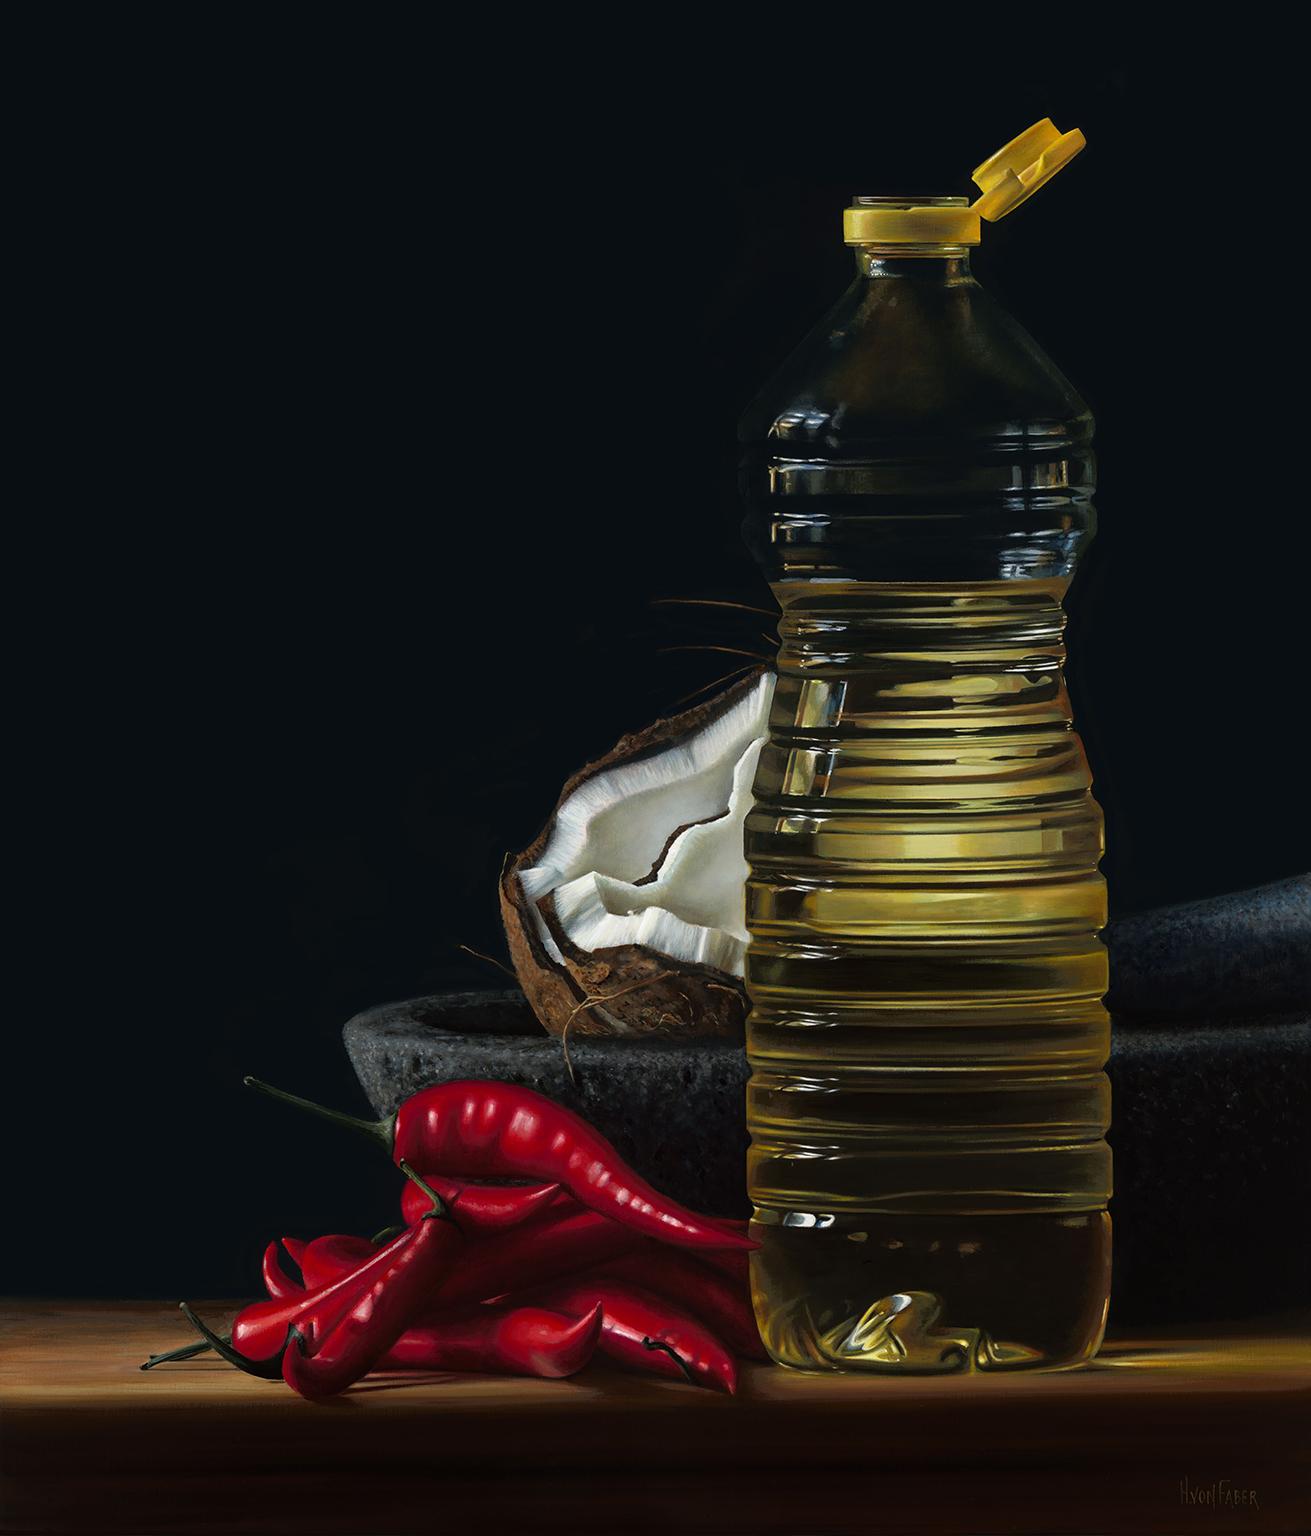 Contemporary Hyper Realist Acrylic Painting : Bottle of Oil I Heidi von Faber

Those who enjoy soothing and powerful still lifes will certainly appreciate Heidi von Faber’s work. The artist from The Hague paints still lifes in which the influence of